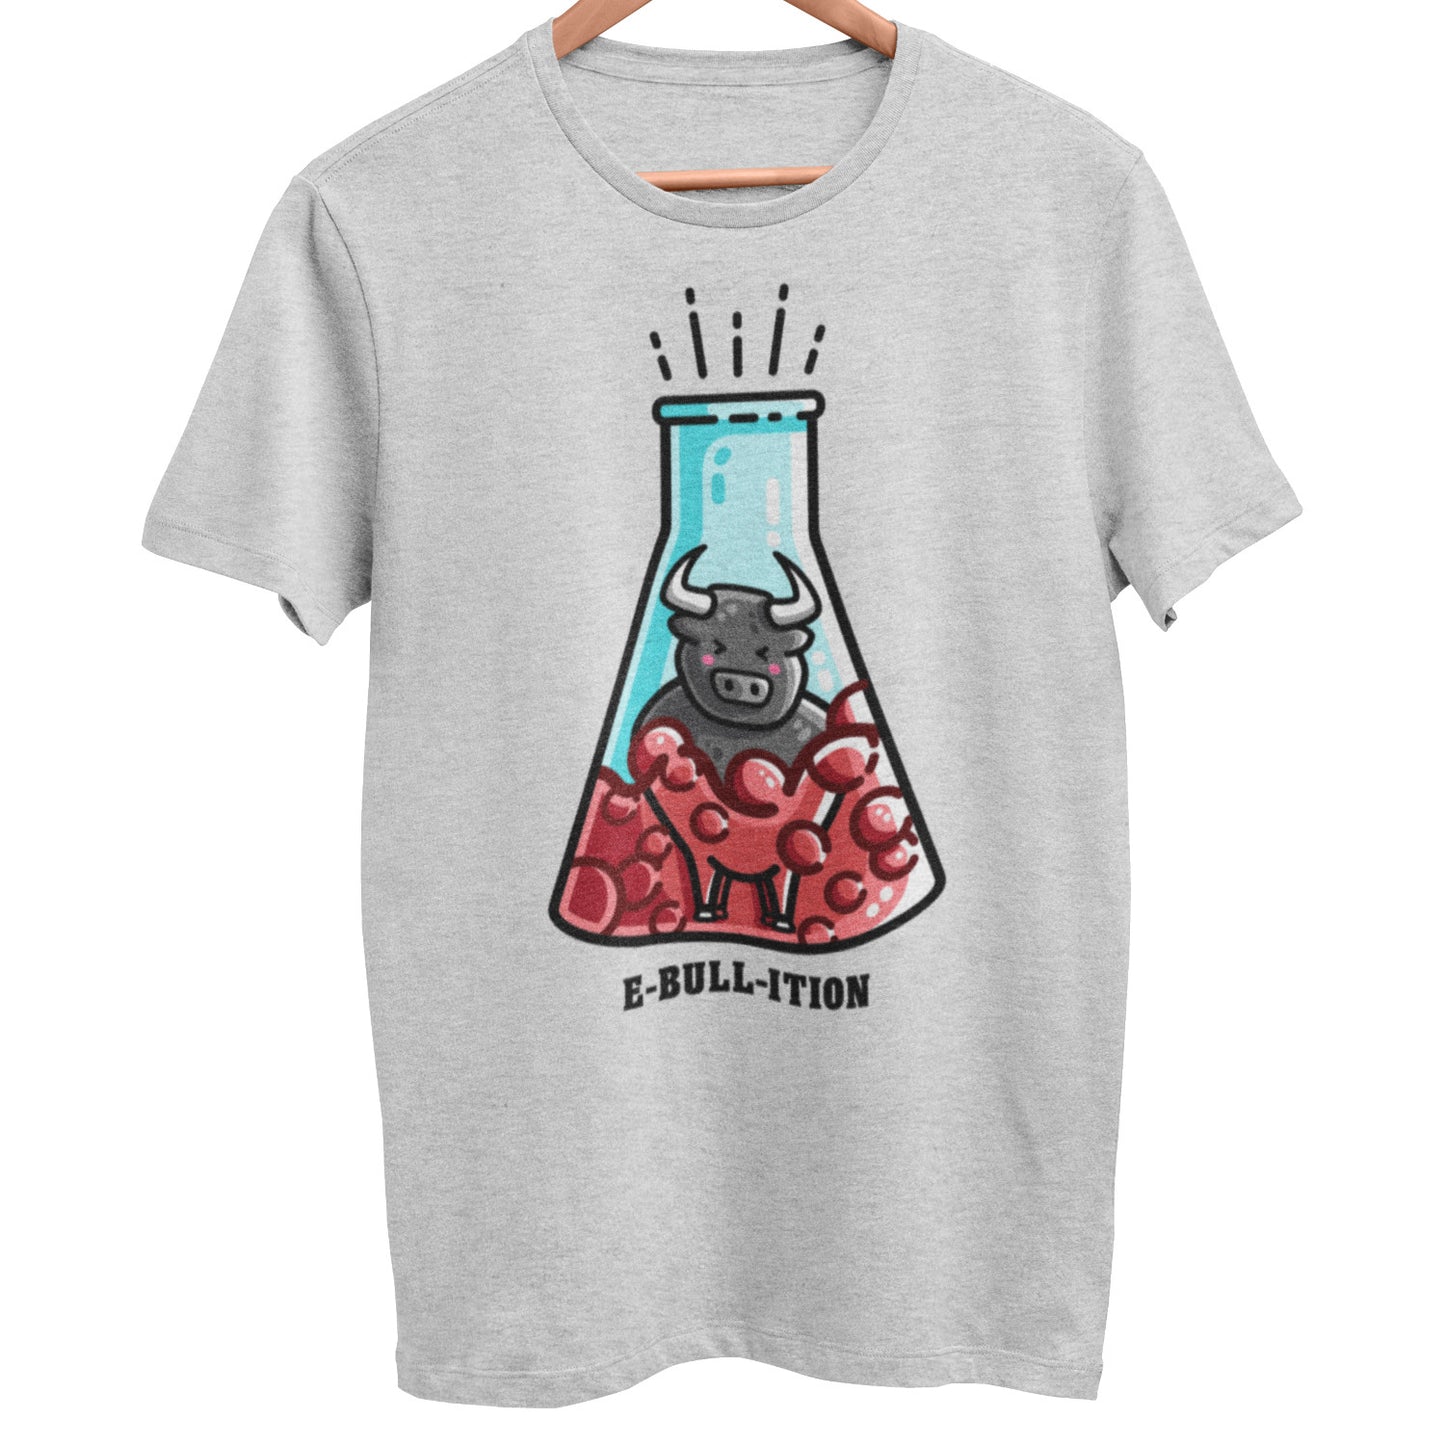 A sports grey unisex crewneck t-shirt on a hanger with a design on the front of a kawaii cute bull in a boiling flask of red liquid with 'e-bull-ition' written beneath.